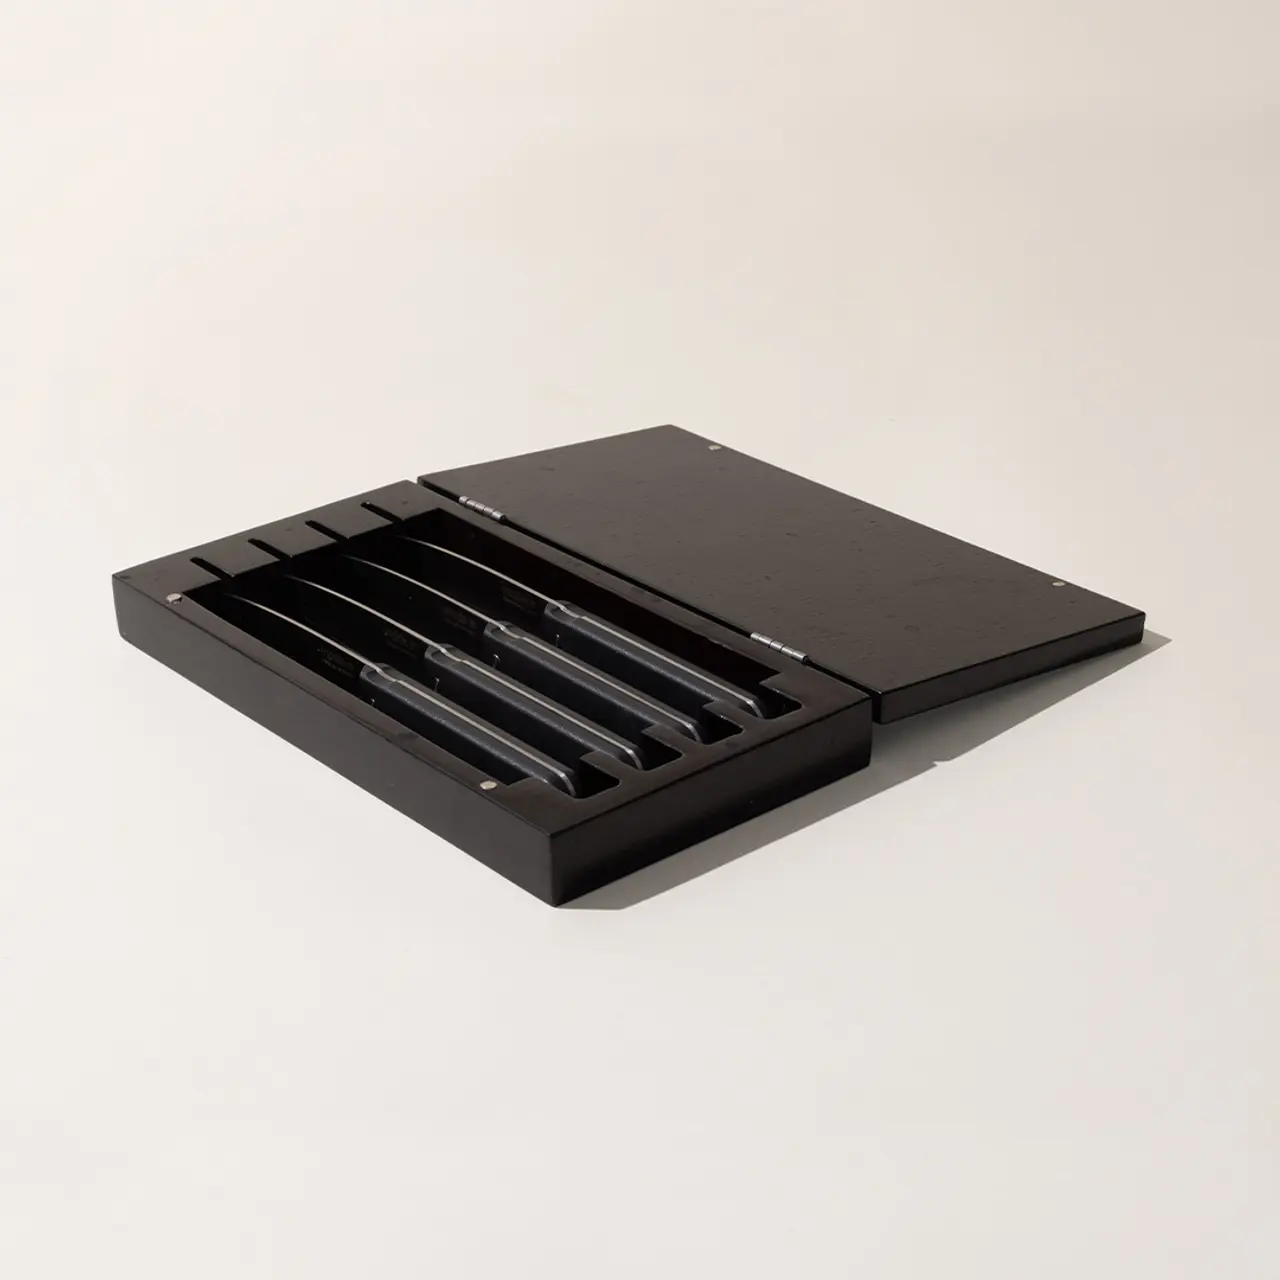 An elegant black box with a set of stylus pens inside, displayed against a plain background.